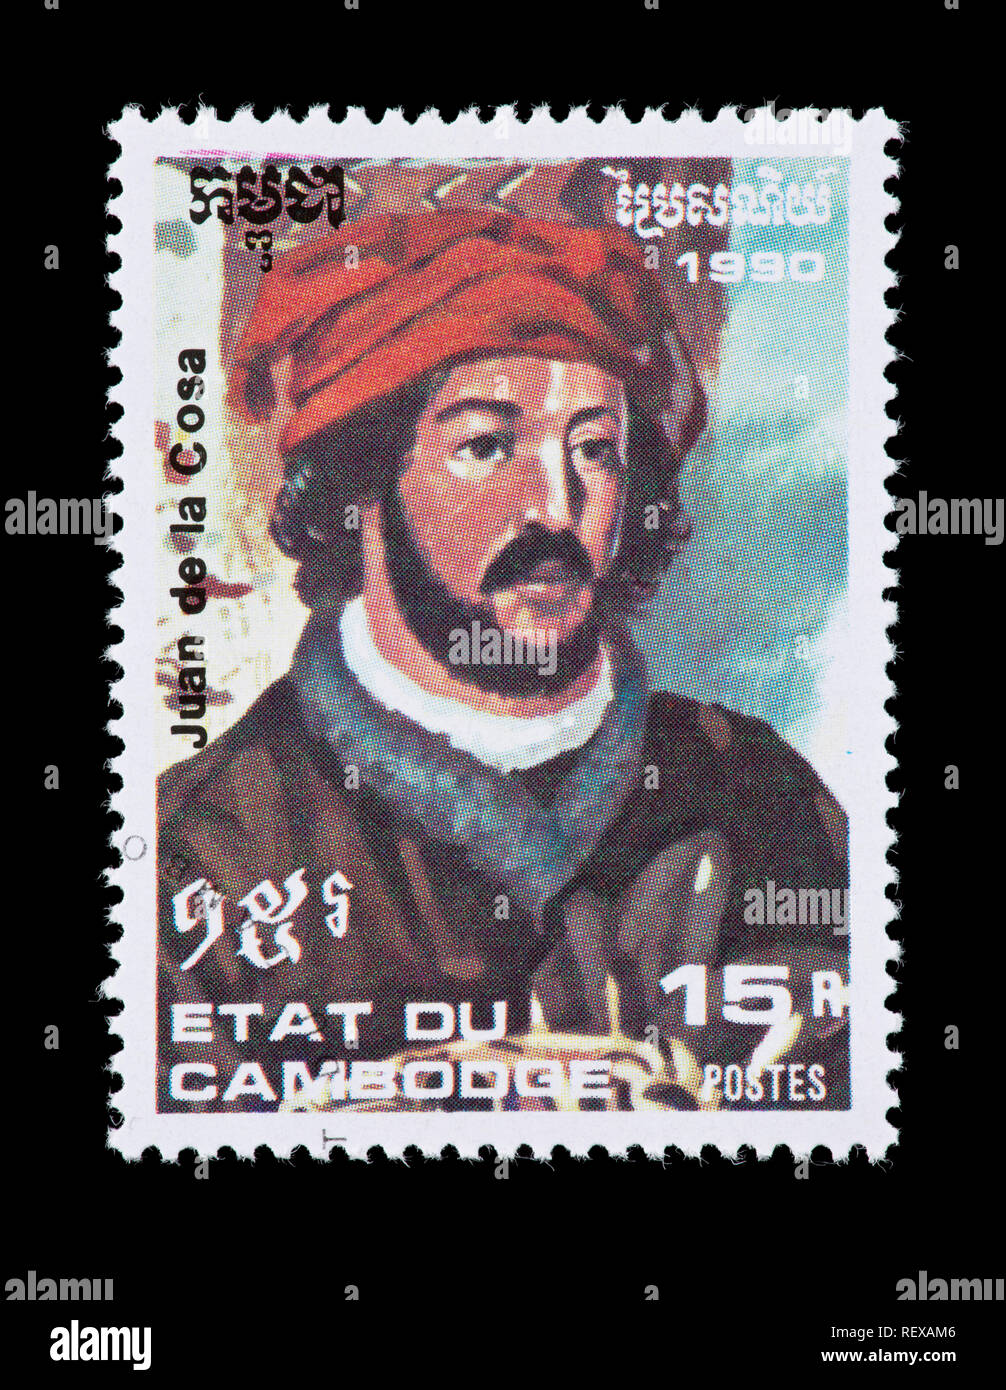 Postage stamp from Cambodia depicting Juan de la Cosa, 500'th anniversary of the discovery of the Americas. Stock Photo